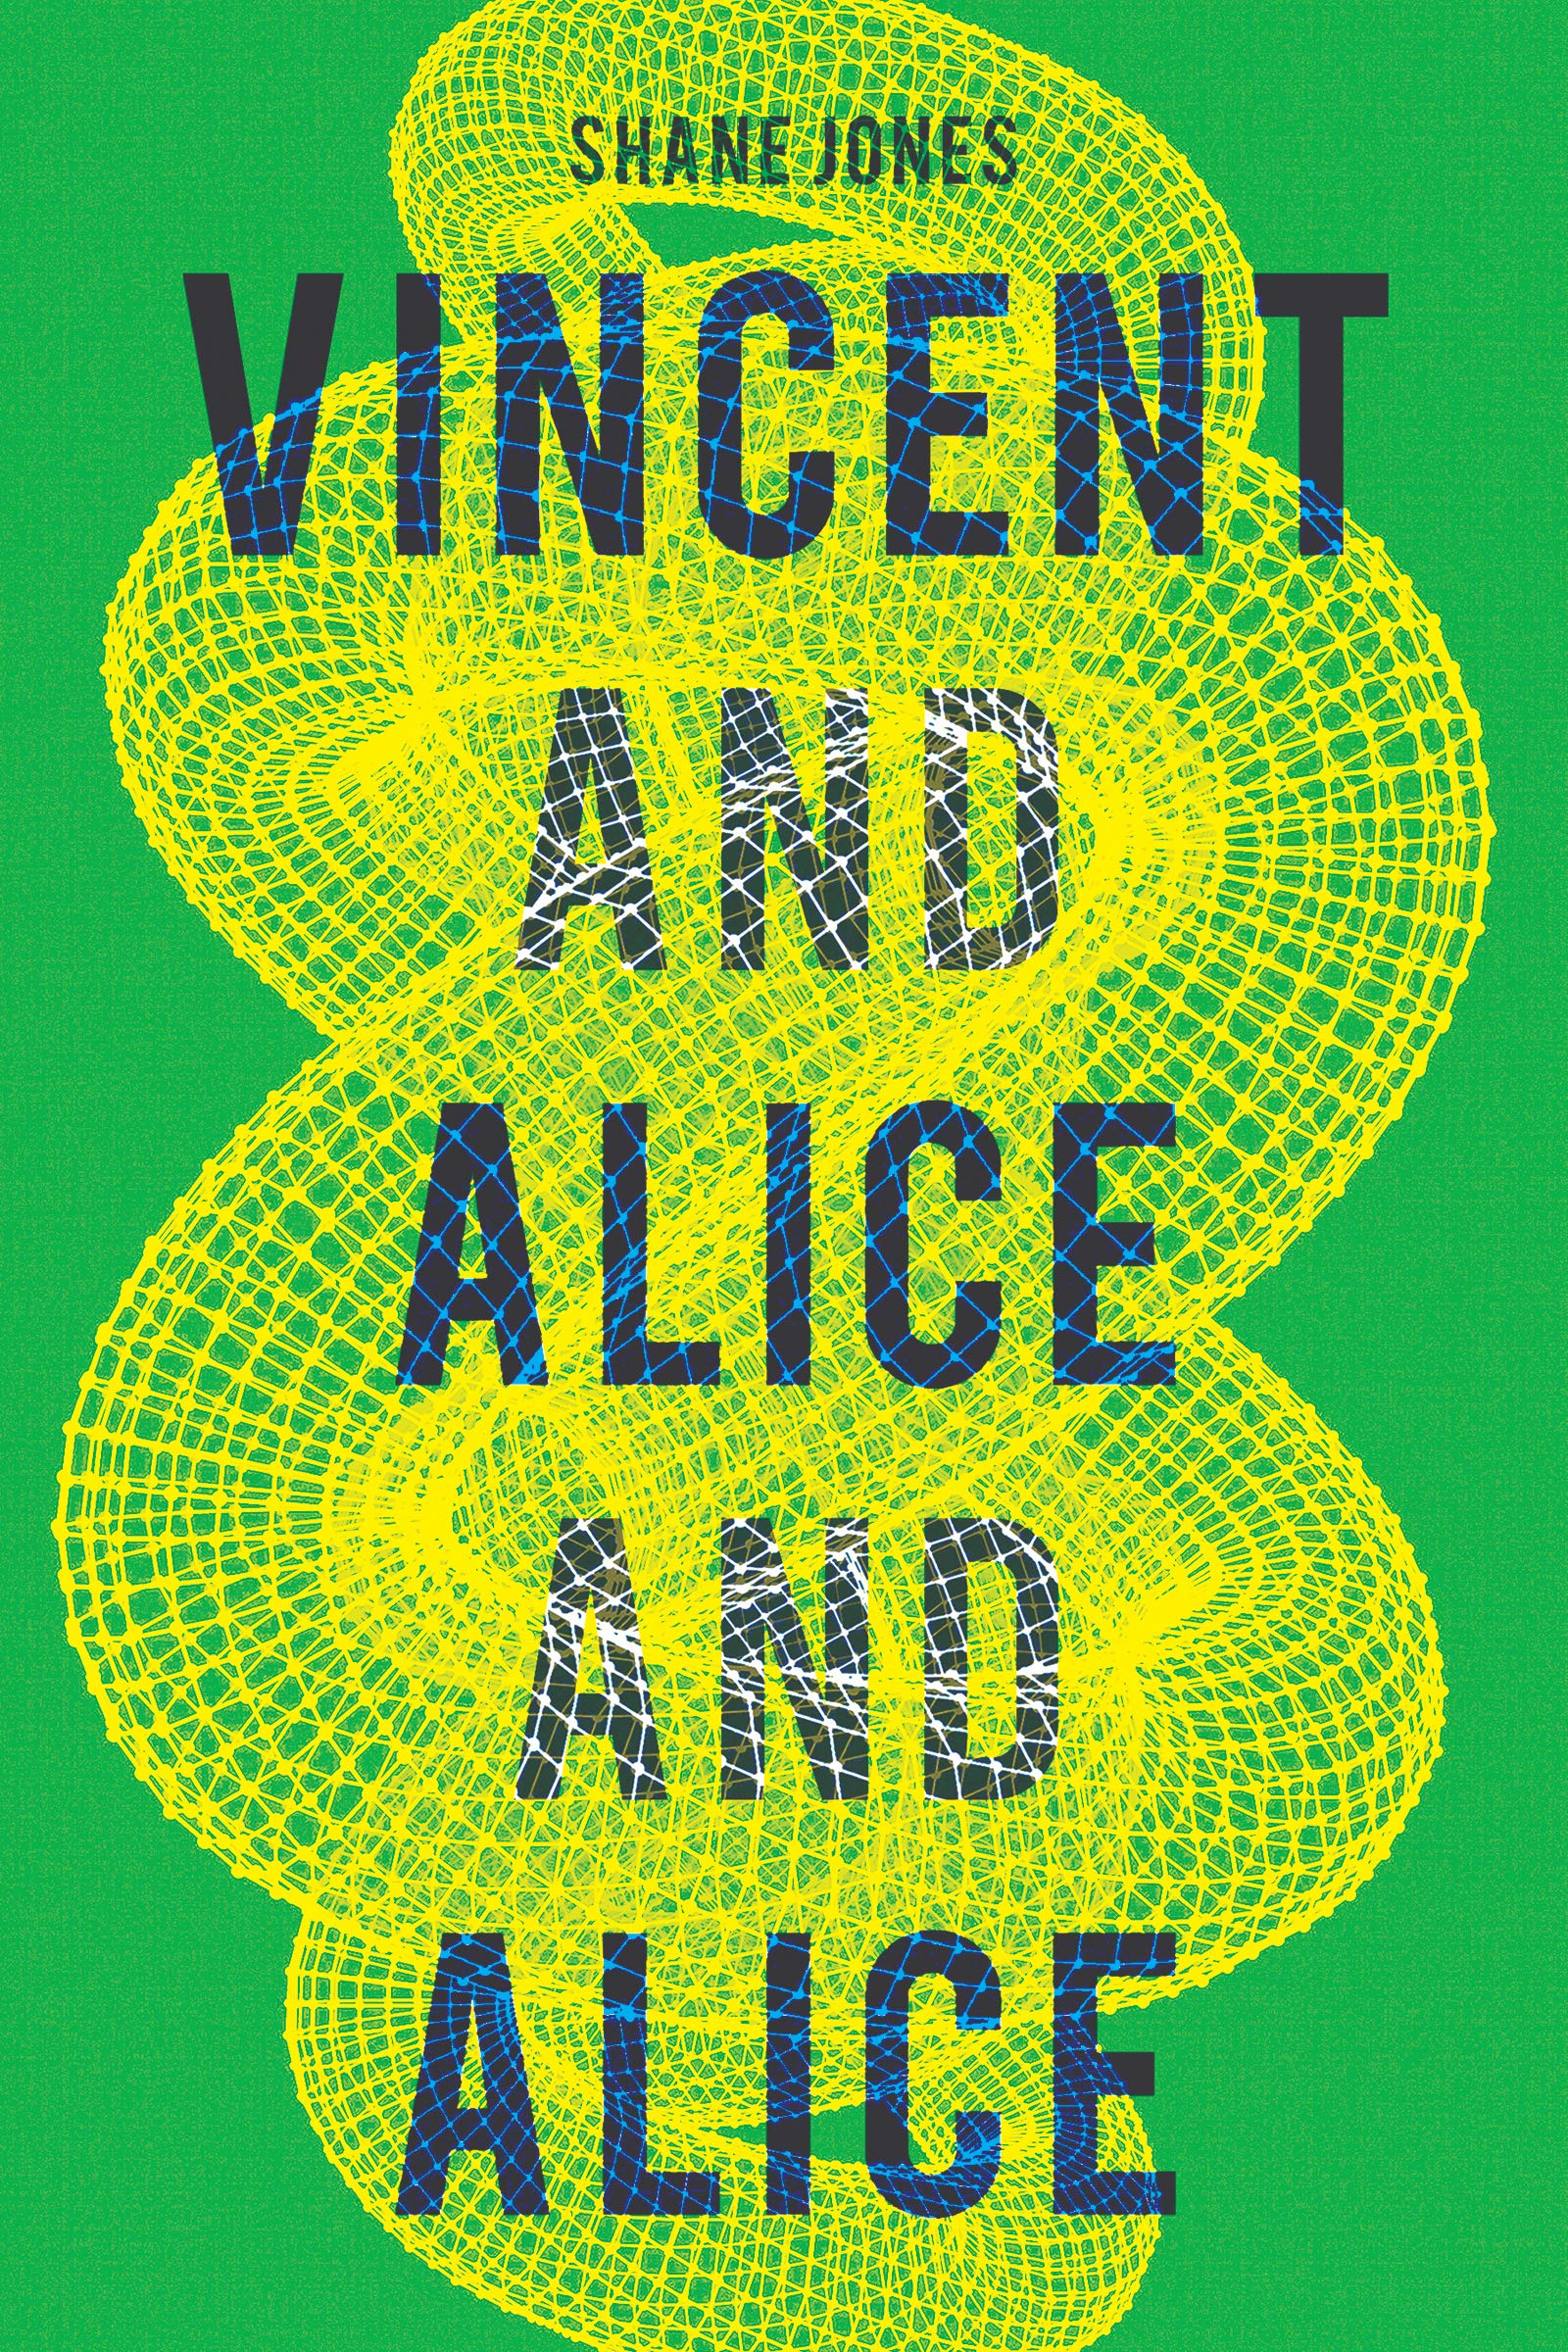 'Vincent and Alice and Alice' by Shane Jones